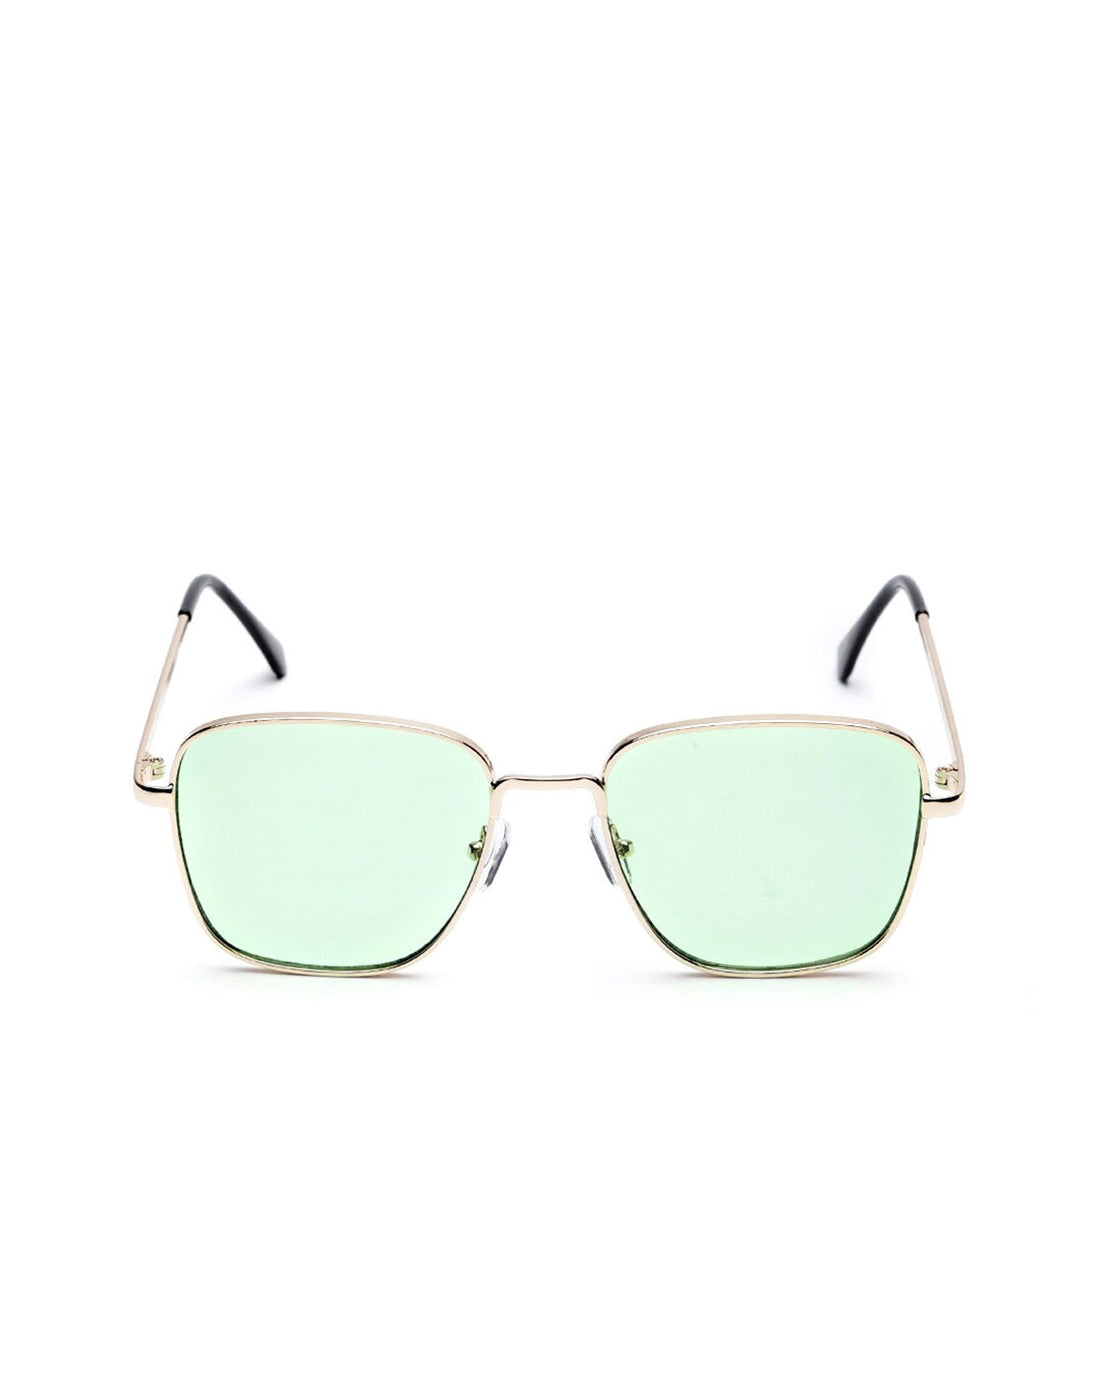 Carlton London Green Lens &amp; Gold-Toned Square Sunglasses with UV Protected Lens For Men